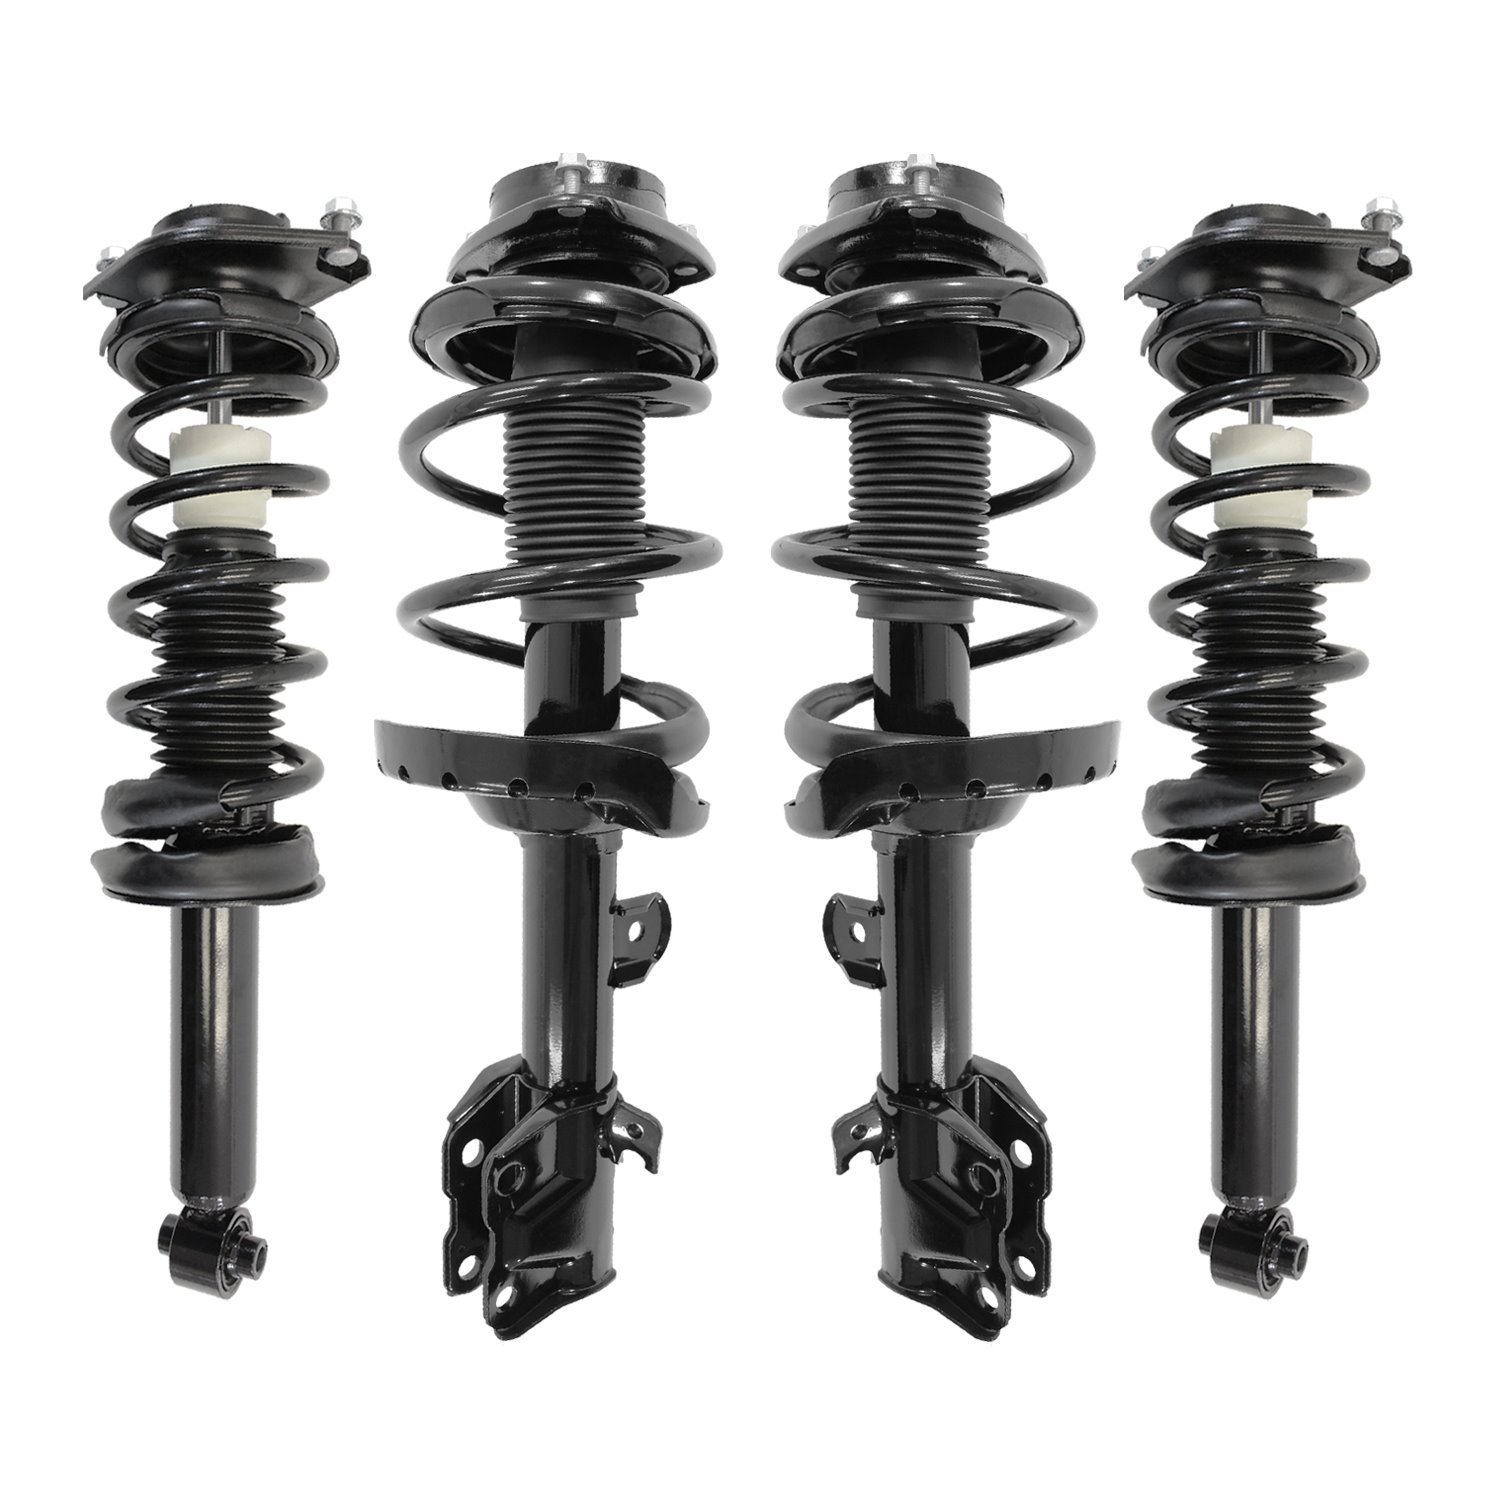 4-13371-16120-001 Front & Rear Suspension Strut & Coil Spring Assembly Kit Fits Select Subaru Outback